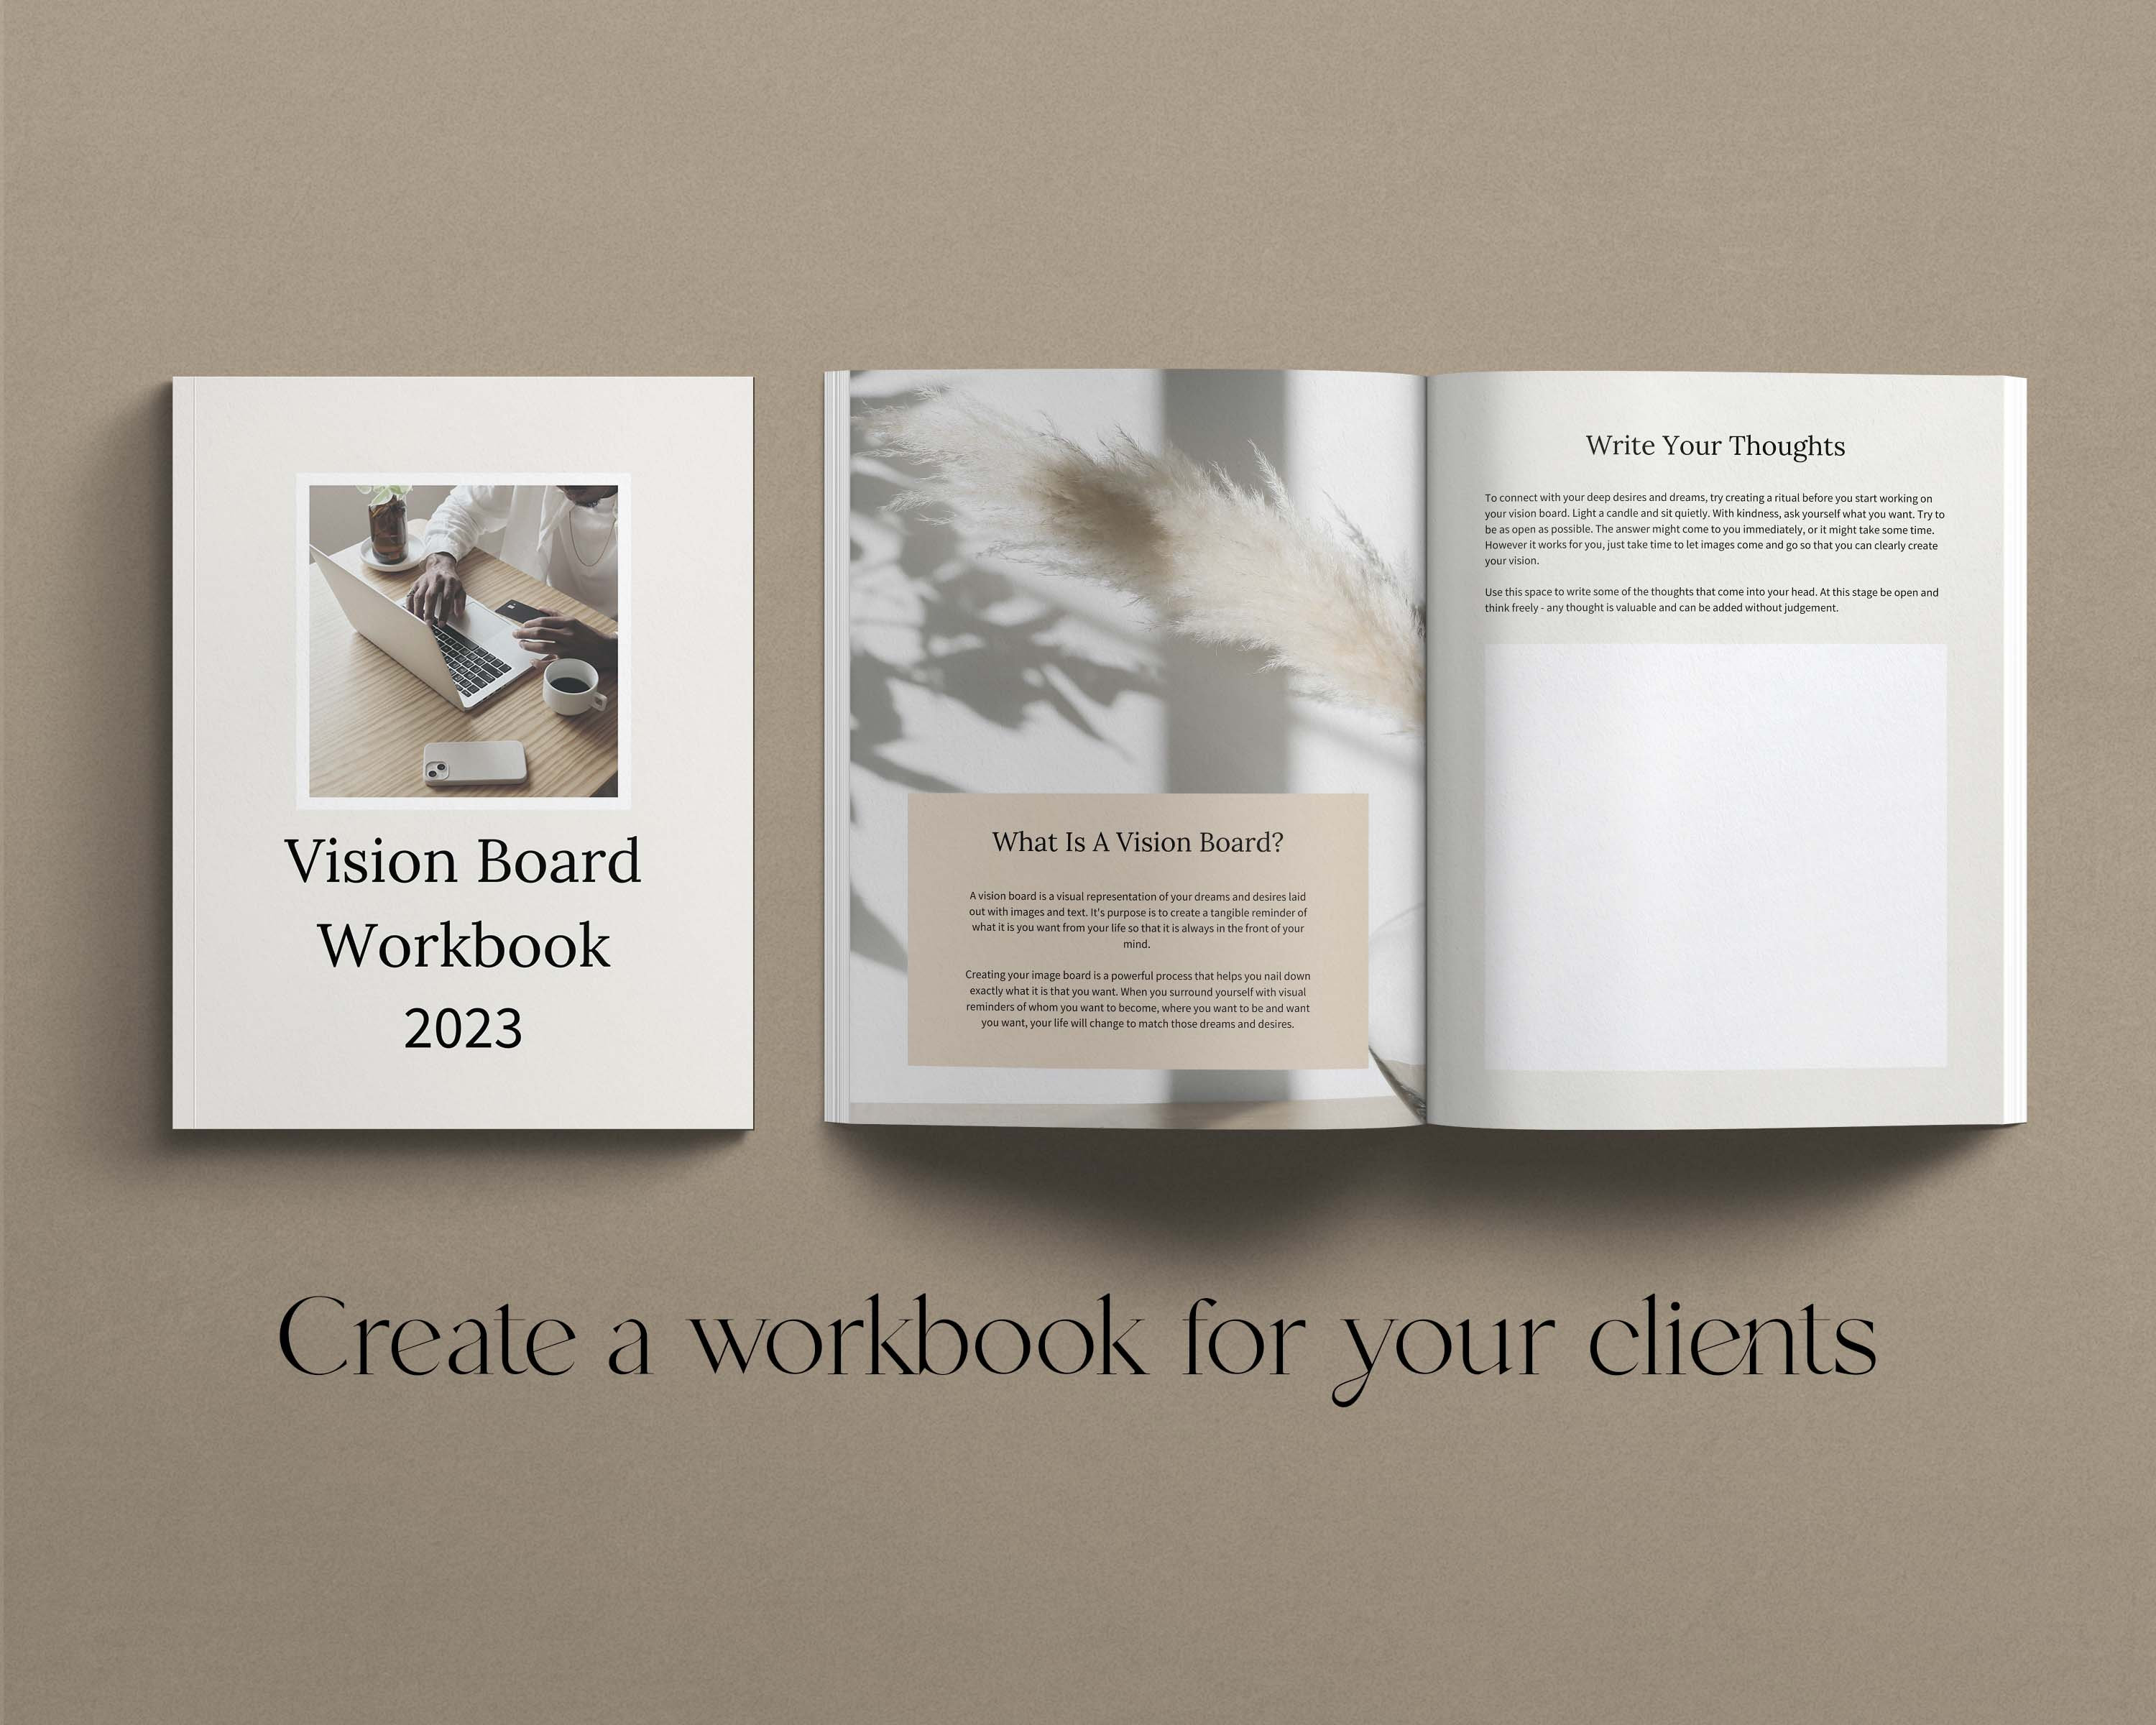 HOW TO MAKE A VISION BOOK THAT ACTUALLY WORKS, VISION BOOK 2023, LIFE  CHANGING